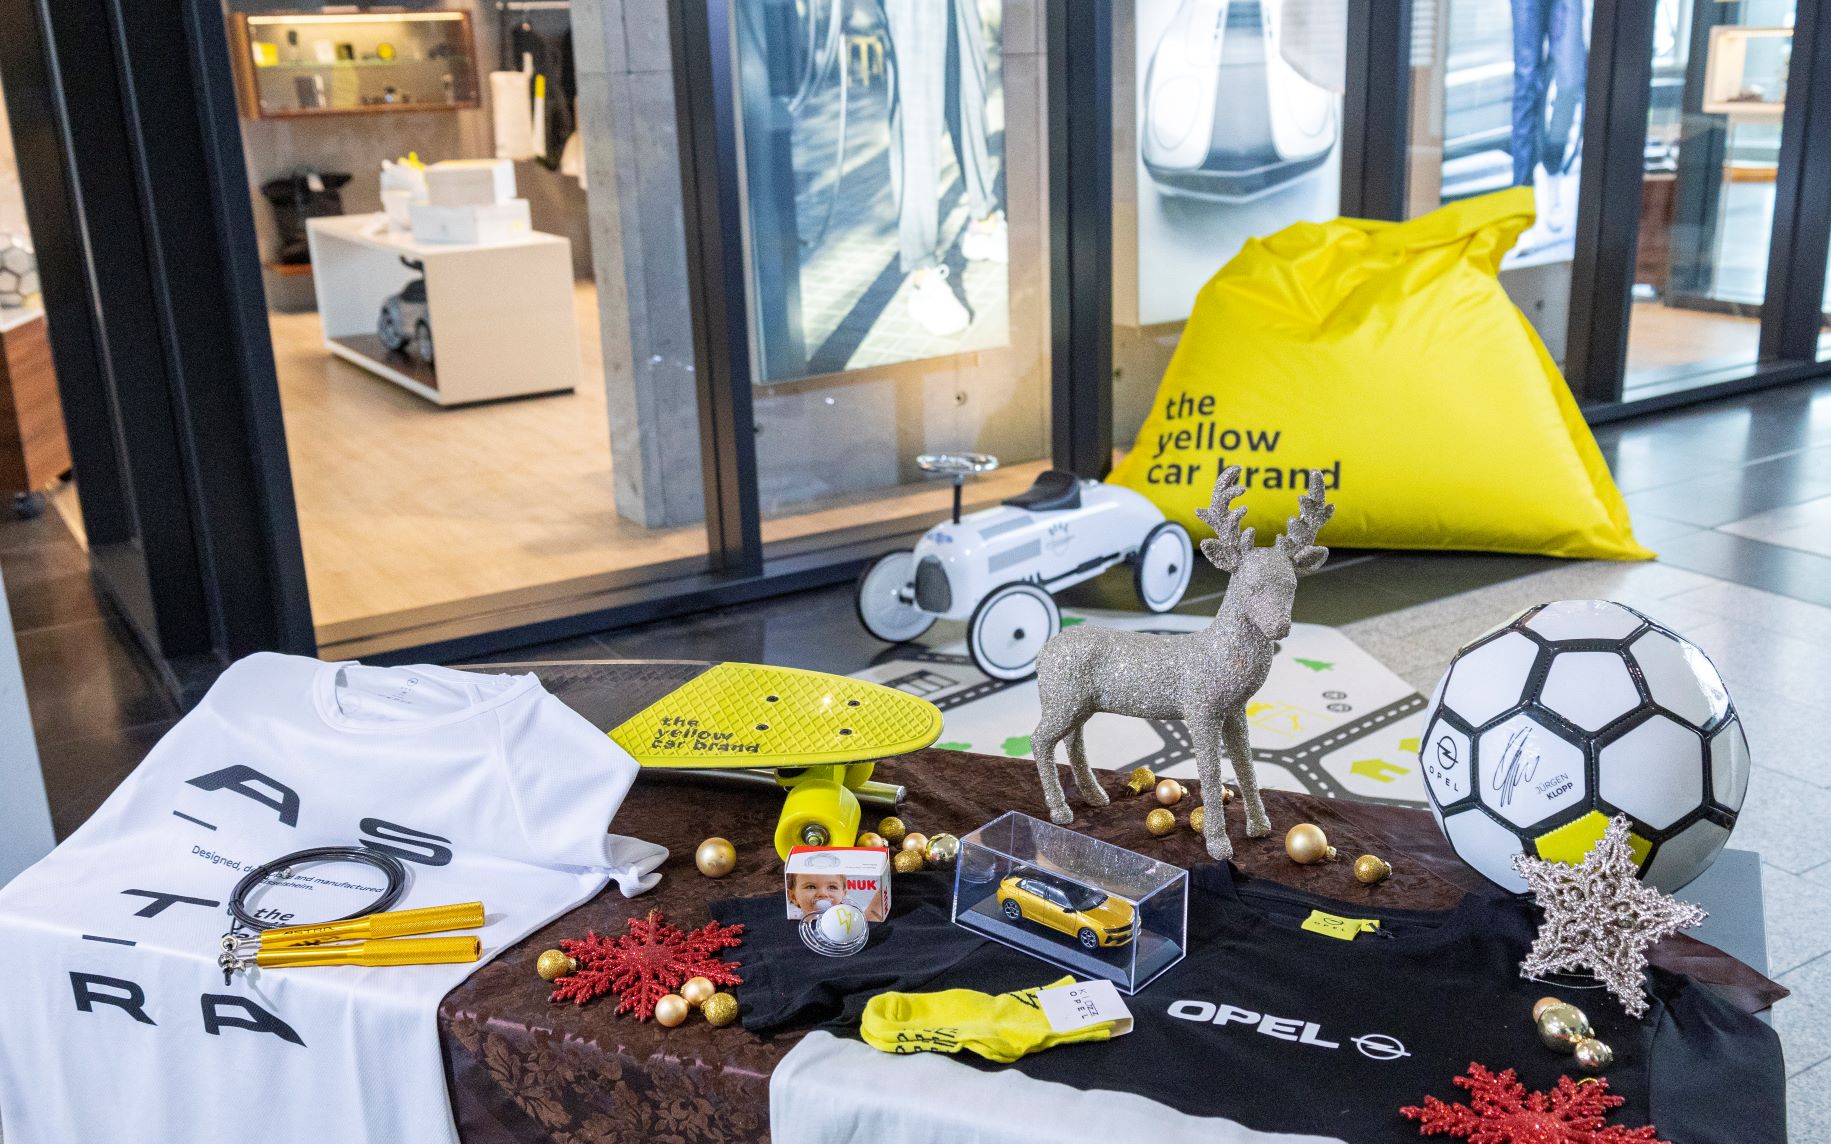 Items from Opel's brand collection on display including a t-shirt, football, model cars and more.